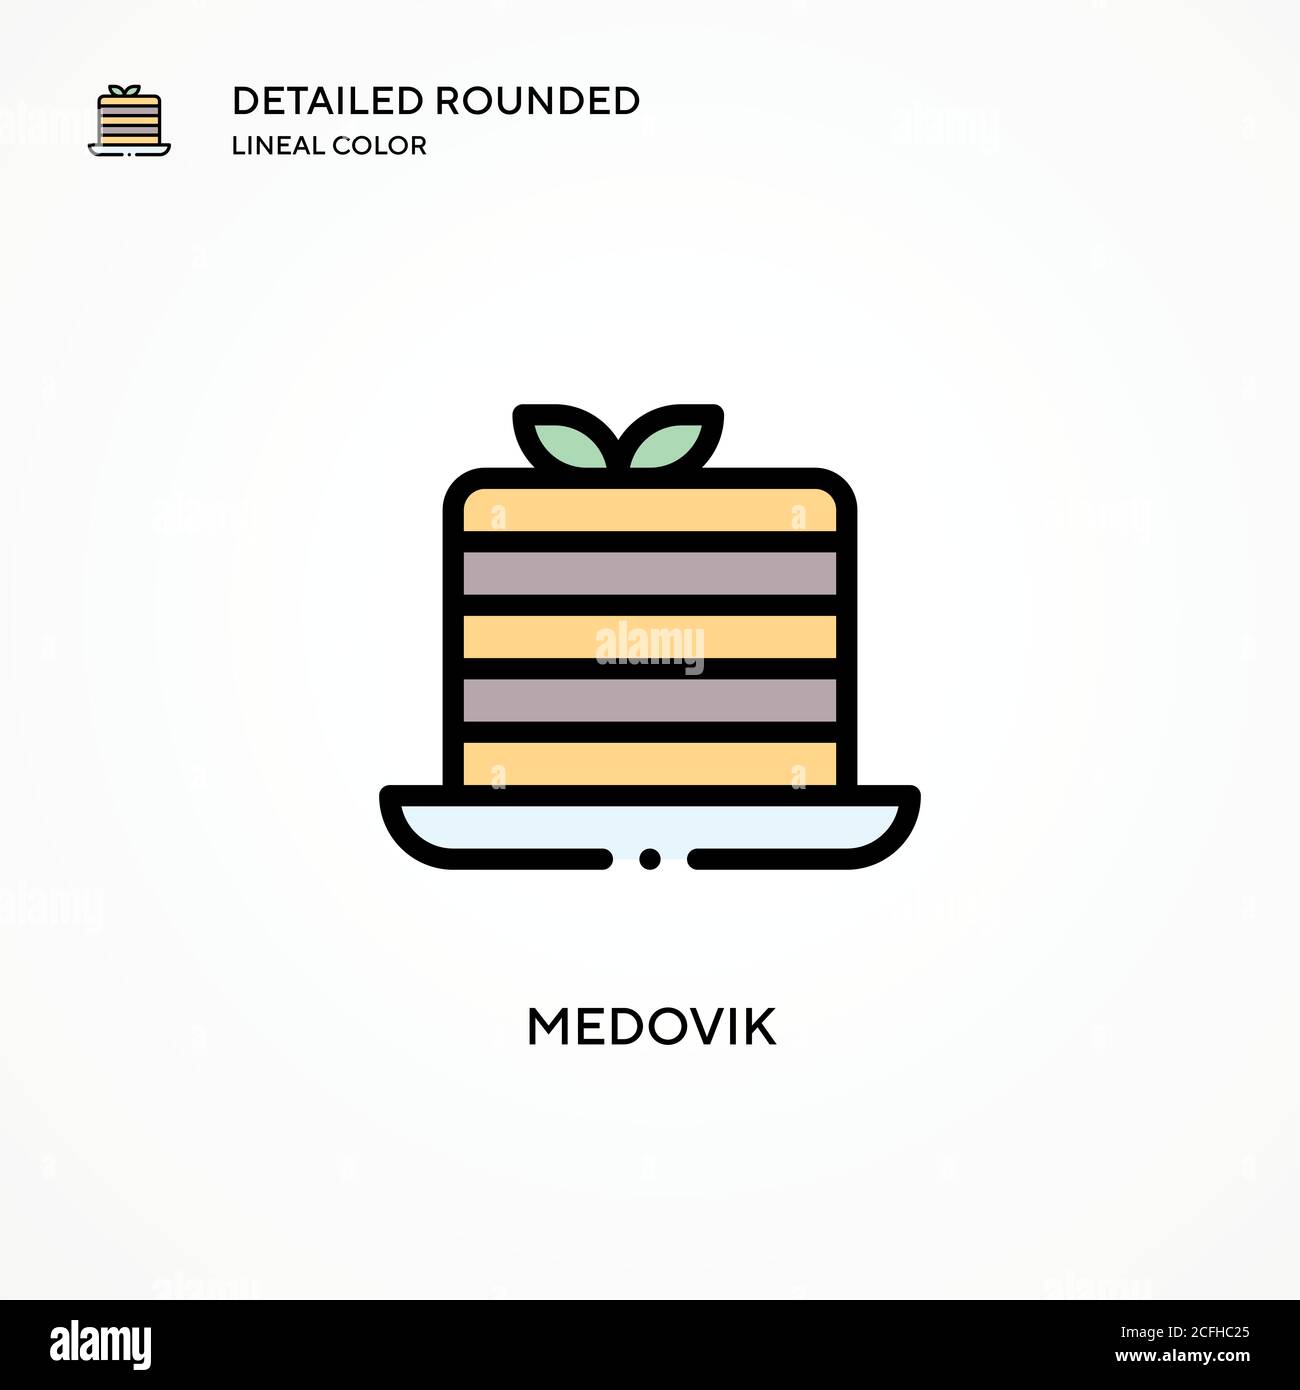 Medovik vector icon. Modern vector illustration concepts. Easy to edit and customize. Stock Vector